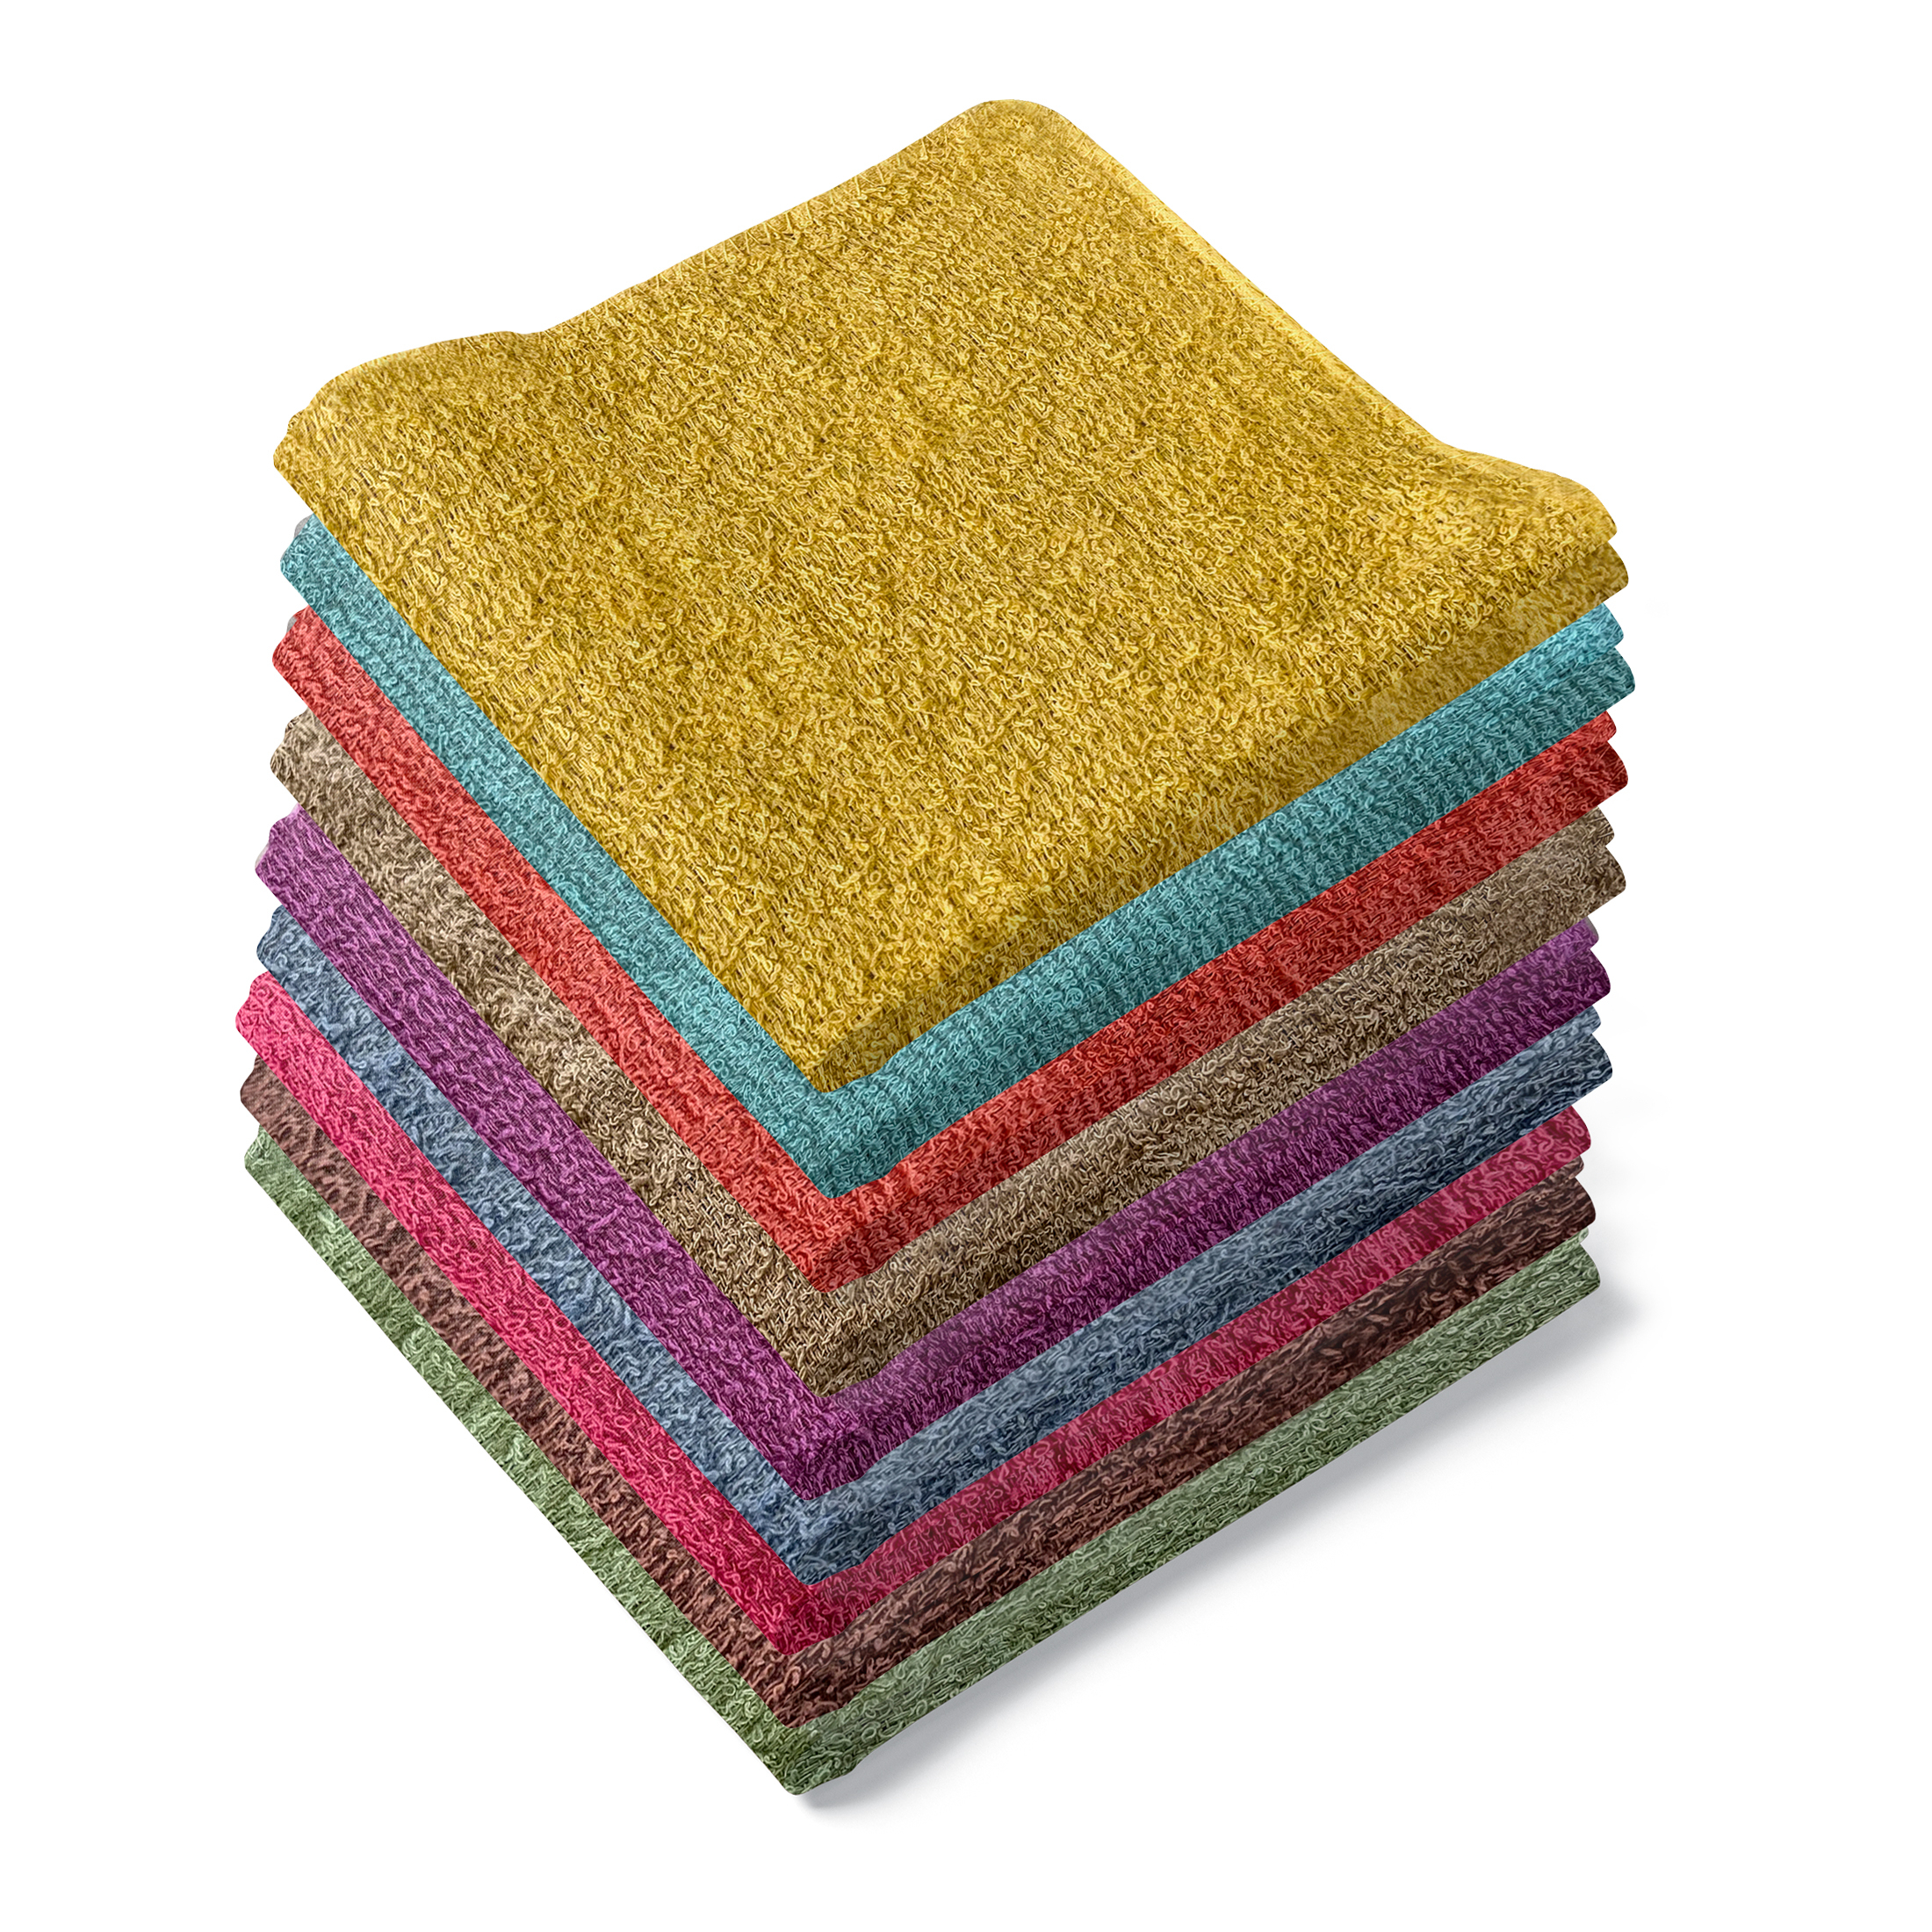 48-Pack: 100% Soft Cotton Absorbent Wash Cloths